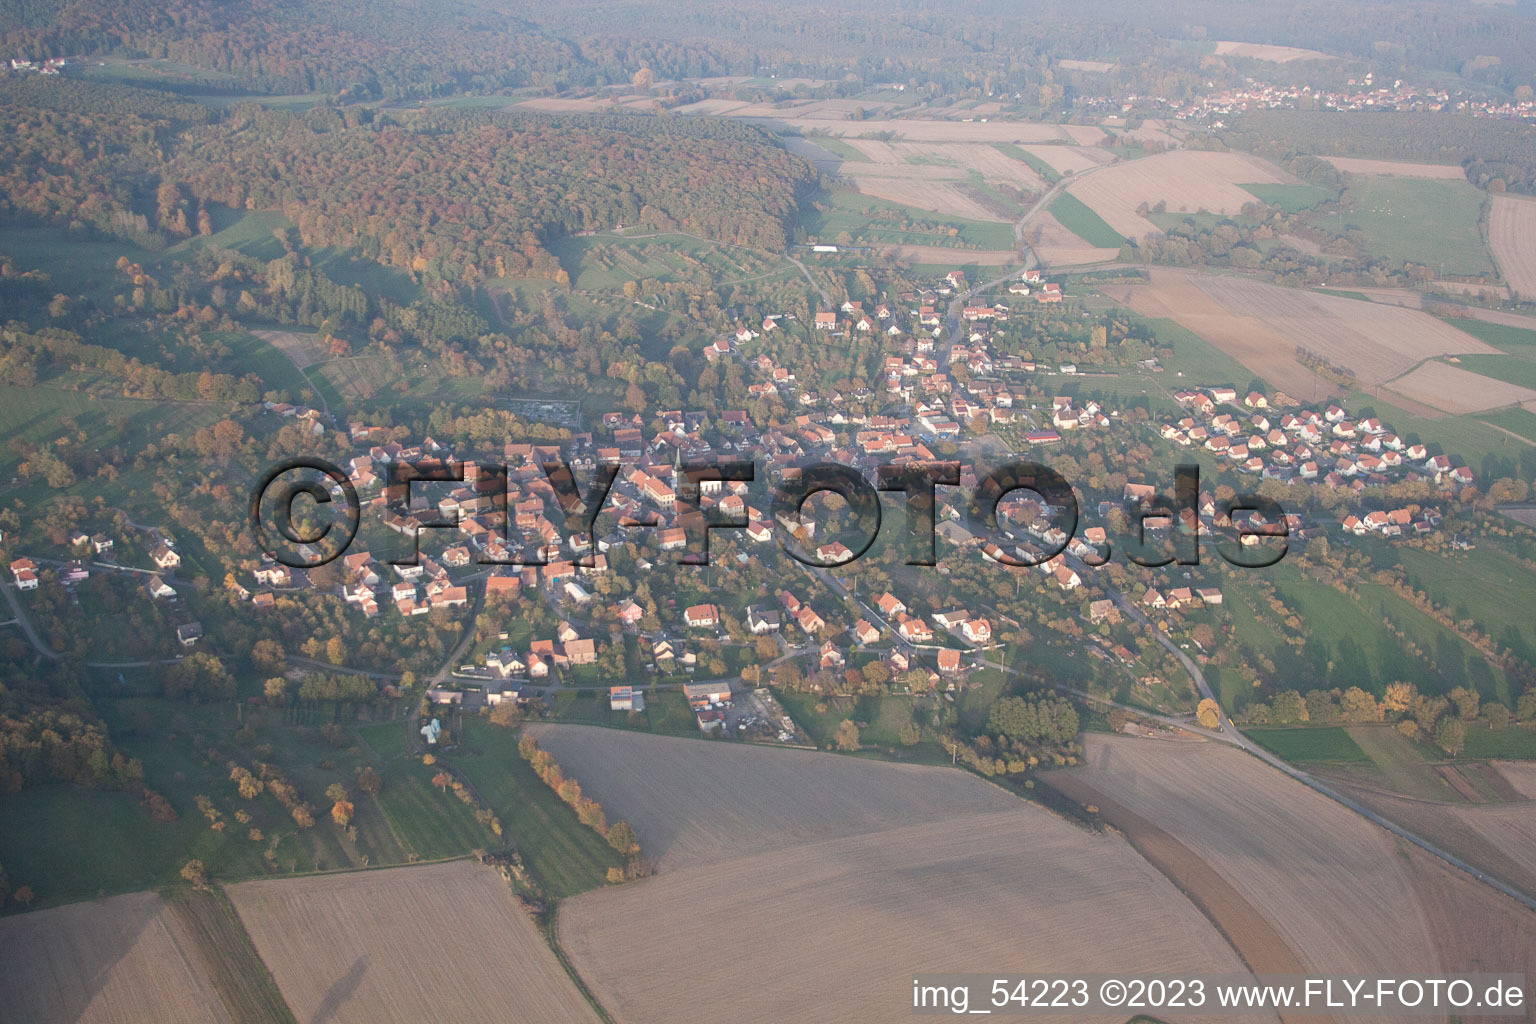 Preuschdorf in the state Bas-Rhin, France seen from a drone